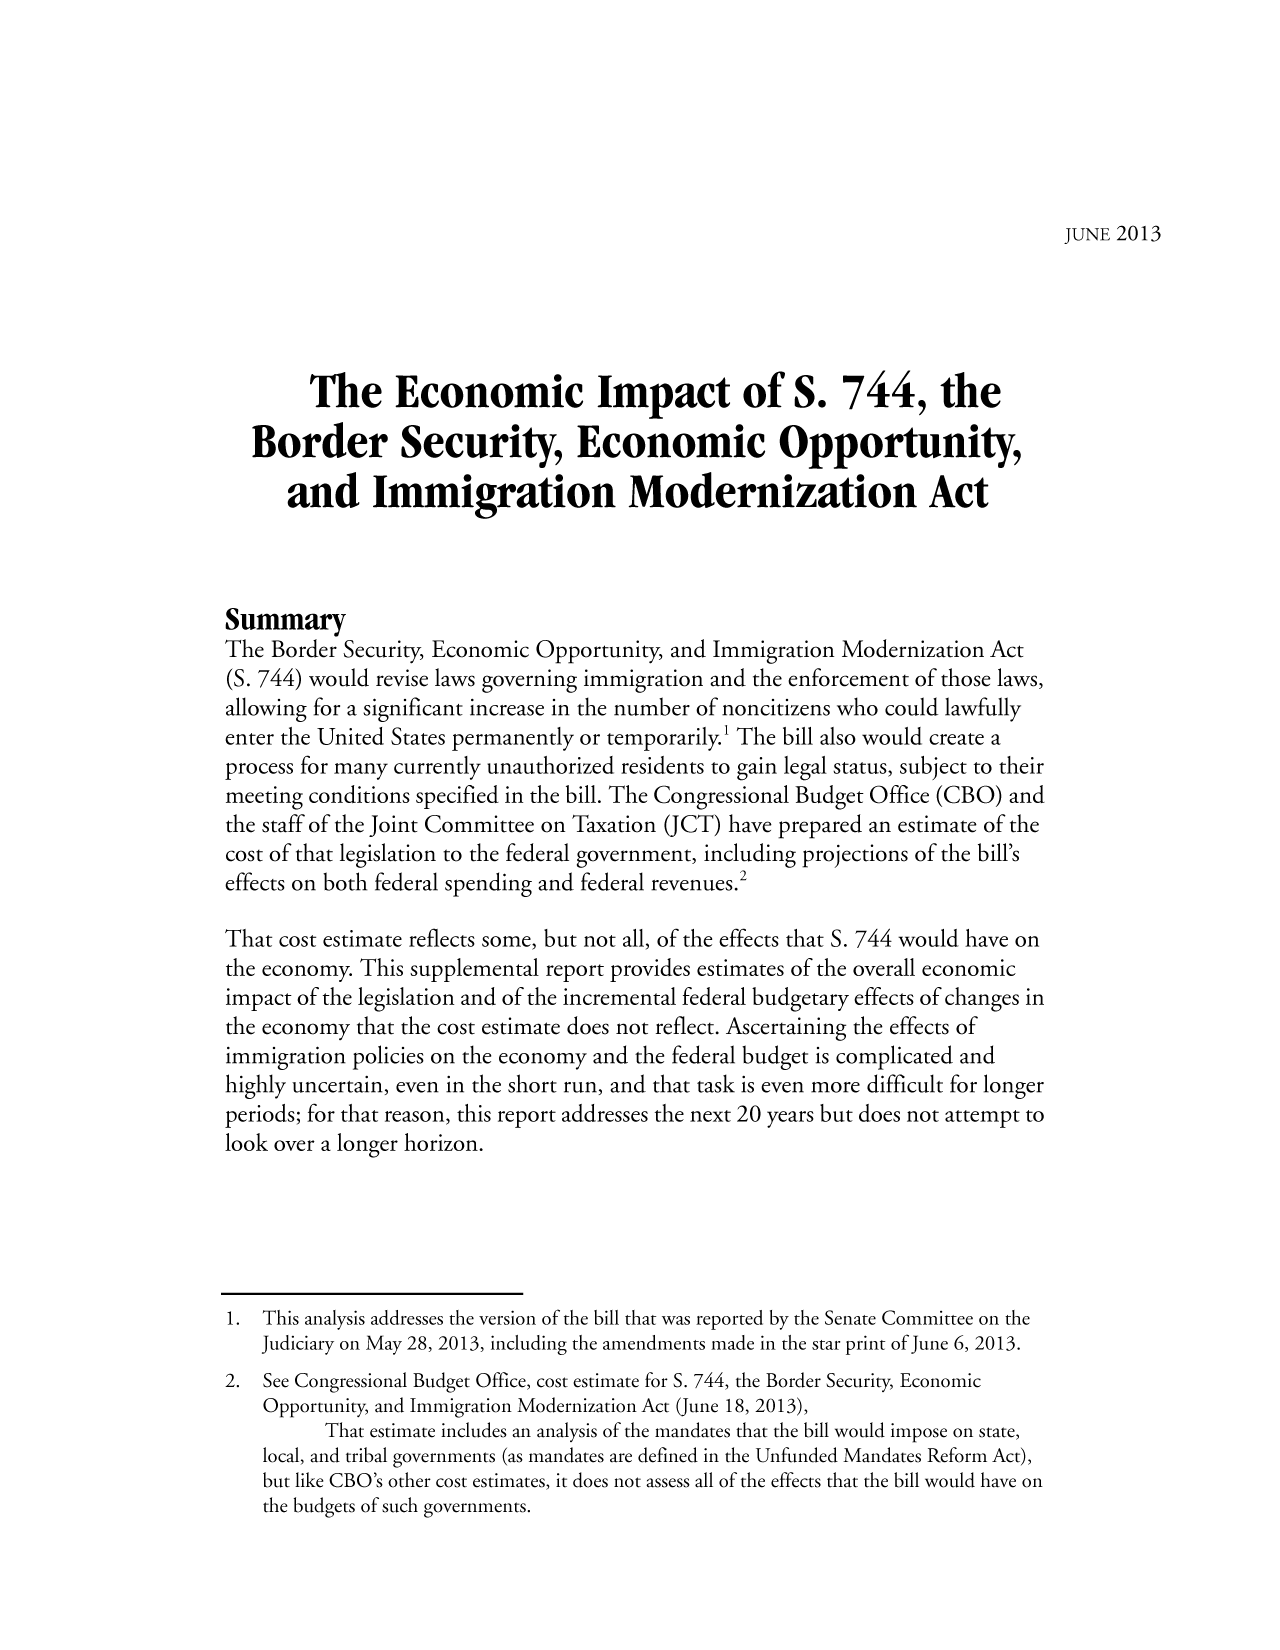 handle is hein.congrec/cbo1740 and id is 1 raw text is: JUNE 2013

The Economic Impact of S. 744, the
Border Security, Economic Opportunity,
and Immigration Modernization Act
Summary
The Border Security, Economic Opportunity, and Immigration Modernization Act
(S. 744) would revise laws governing immigration and the enforcement of those laws,
allowing for a significant increase in the number of noncitizens who could lawfully
enter the United States permanently or temporarily.! The bill also would create a
process for many currently unauthorized residents to gain legal status, subject to their
meeting conditions specified in the bill. The Congressional Budget Office (CBO) and
the staff of the Joint Committee on Taxation (JCT) have prepared an estimate of the
cost of that legislation to the federal government, including projections of the bill's
effects on both federal spending and federal revenues.2
That cost estimate reflects some, but not all, of the effects that S. 744 would have on
the economy. This supplemental report provides estimates of the overall economic
impact of the legislation and of the incremental federal budgetary effects of changes in
the economy that the cost estimate does not reflect. Ascertaining the effects of
immigration policies on the economy and the federal budget is complicated and
highly uncertain, even in the short run, and that task is even more difficult for longer
periods; for that reason, this report addresses the next 20 years but does not attempt to
look over a longer horizon.
1. This analysis addresses the version of the bill that was reported by the Senate Committee on the
Judiciary on May 28, 2013, including the amendments made in the star print of June 6, 2013.
2. See Congressional Budget Office, cost estimate for S. 744, the Border Security, Economic
Opportunity, and Immigration Modernization Act (June 18, 2013),
That estimate includes an analysis of the mandates that the bill would impose on state,
local, and tribal governments (as mandates are defined in the Unfunded Mandates Reform Act),
but like CBO's other cost estimates, it does not assess all of the effects that the bill would have on
the budgets of such governments.


